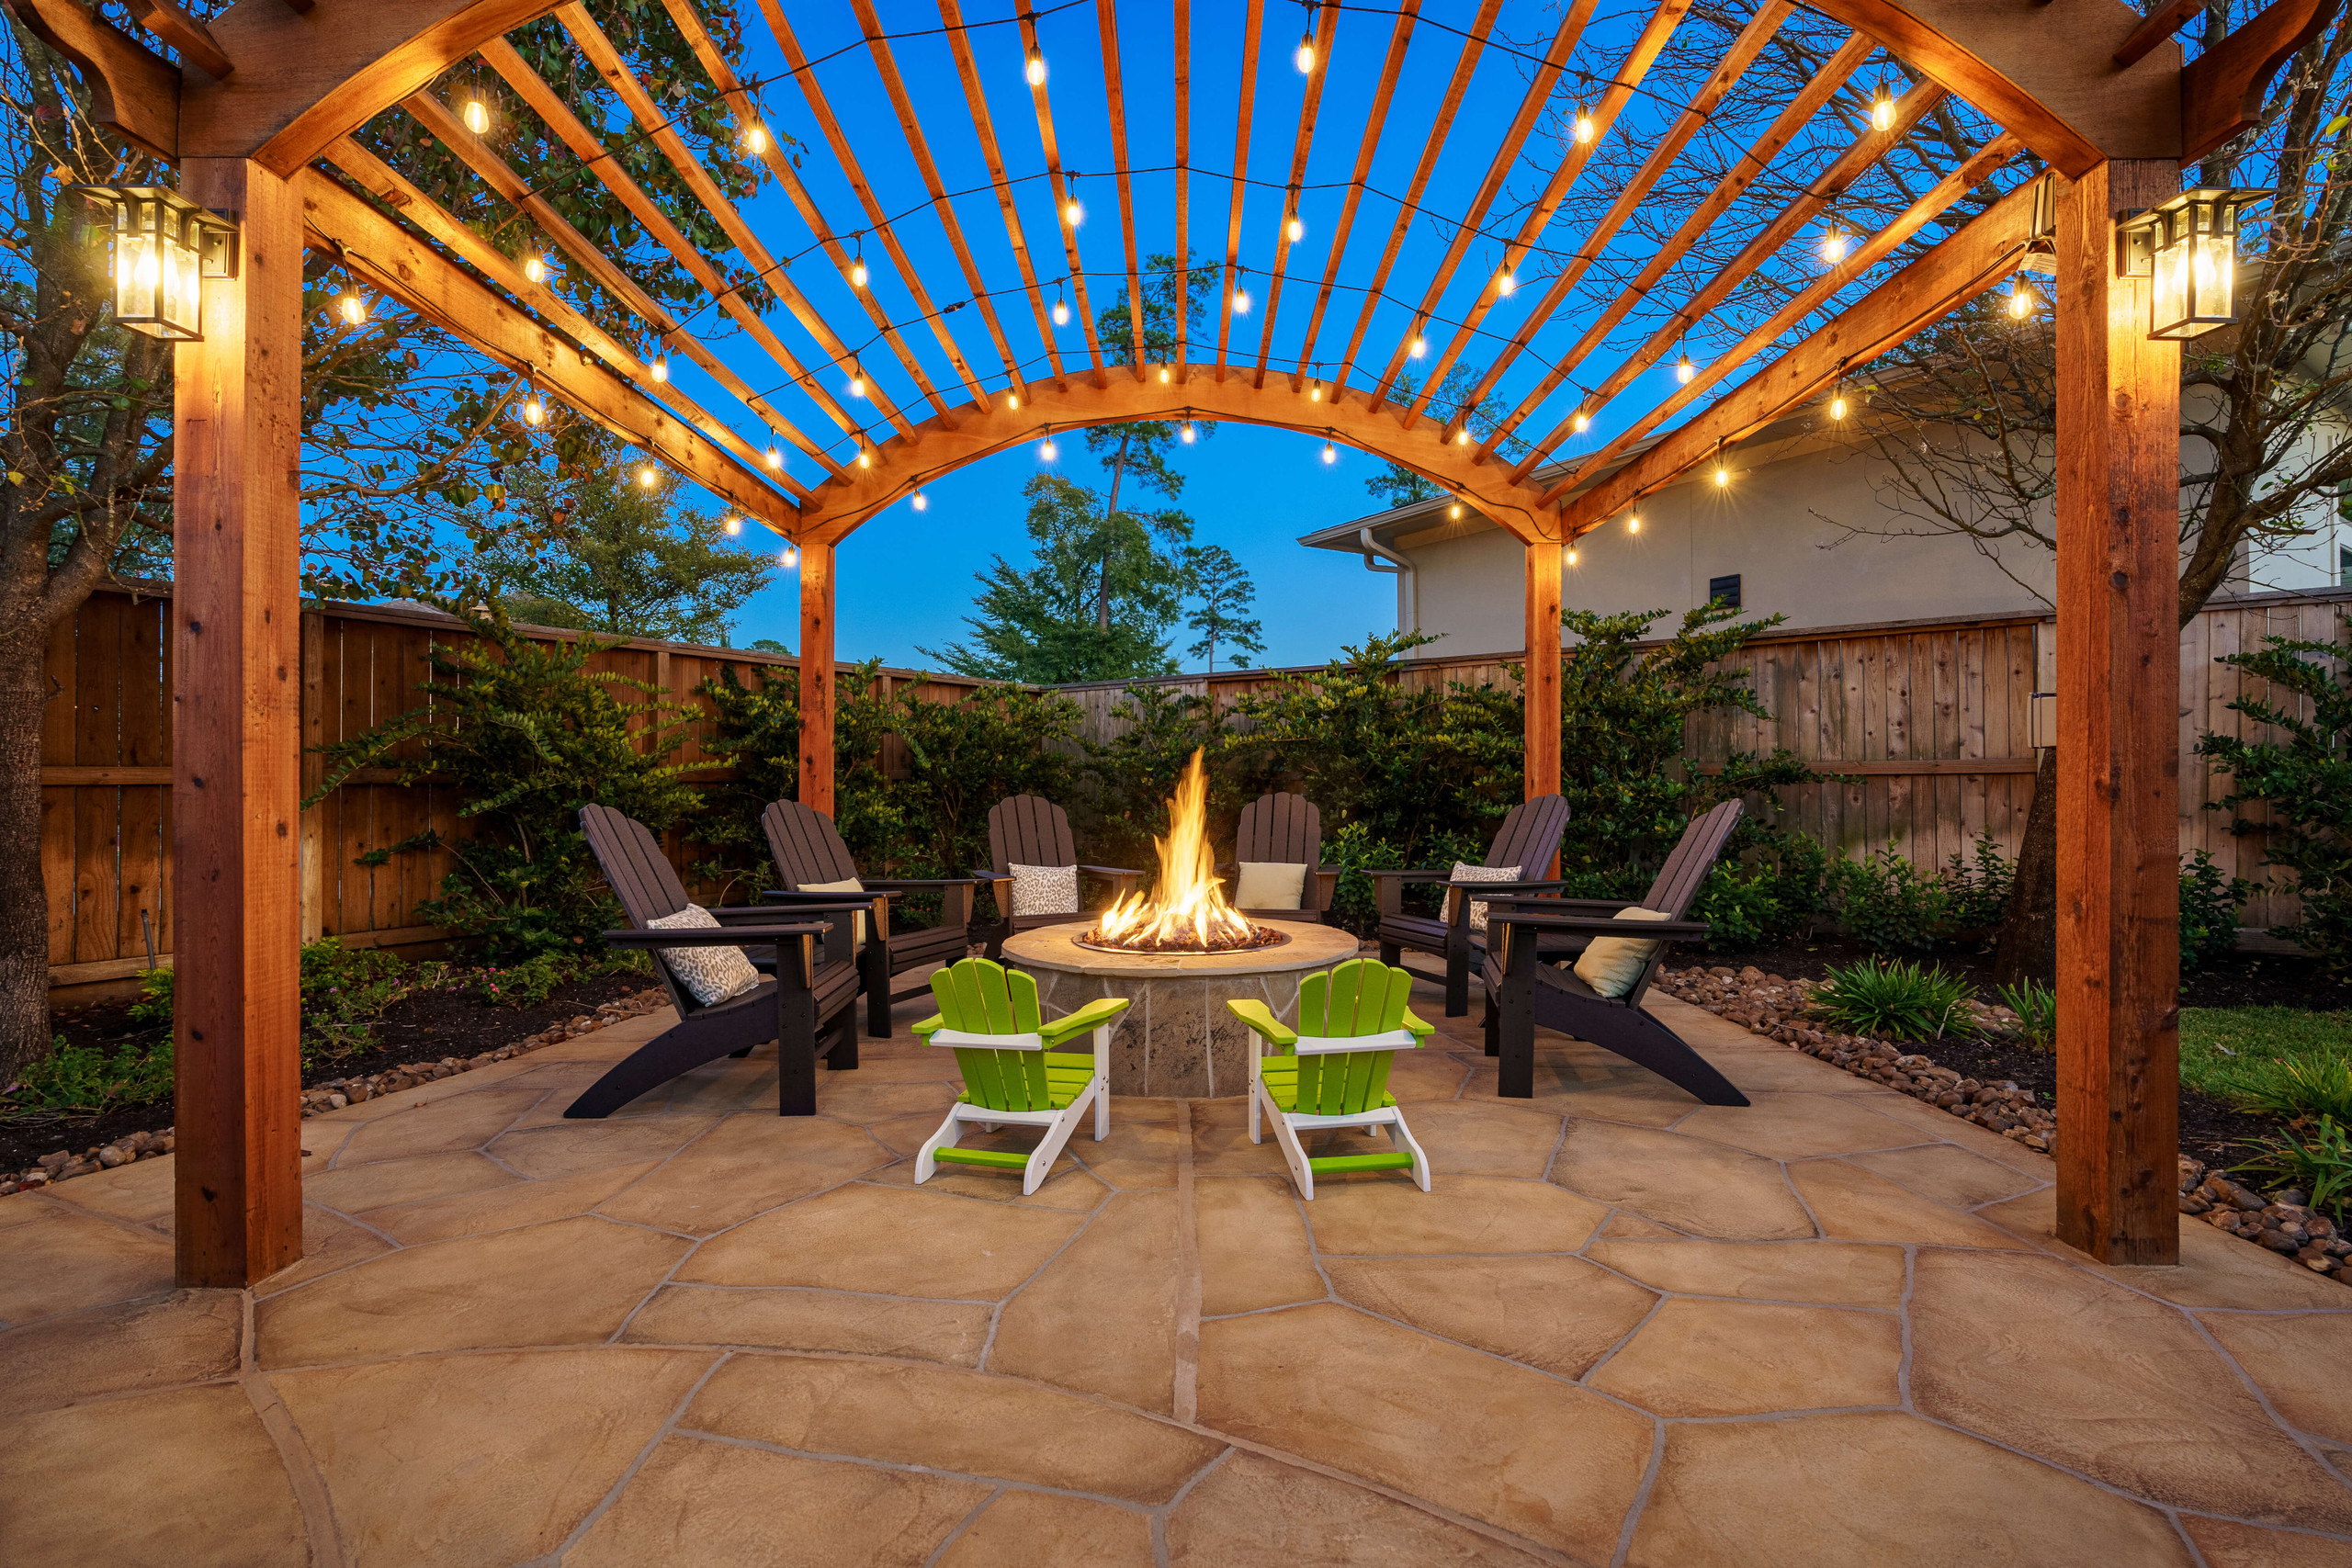 Backyard design with pergola and firepit